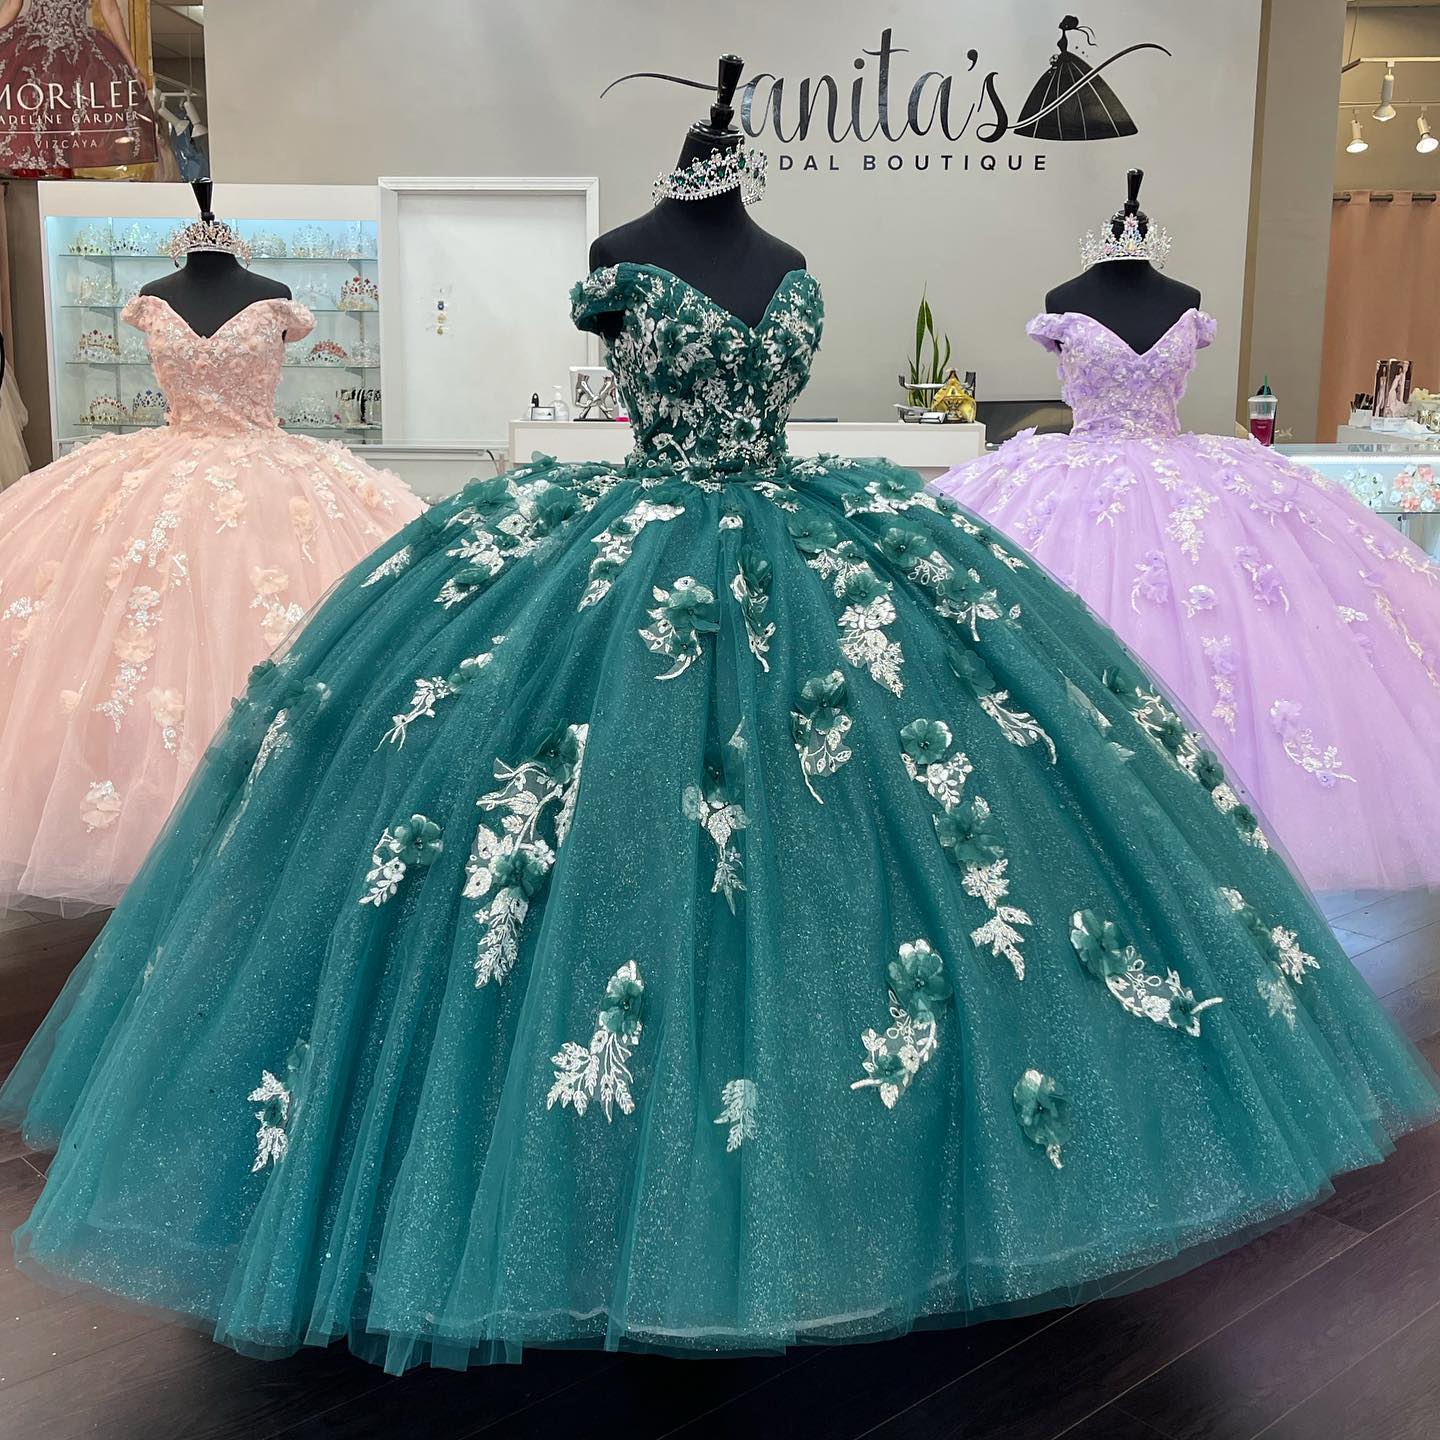 where can i find sparkly quinceanera dress,la glitter quinceanera dress dallas texas,glitter houston quinceanera dress,emerald green quinceanera dress,green quinceanera dress,quinceanera dress greenville sc,unique quinceanera dress puffy,3d floral applique quinceanera dress,quinceanera dress under 300,